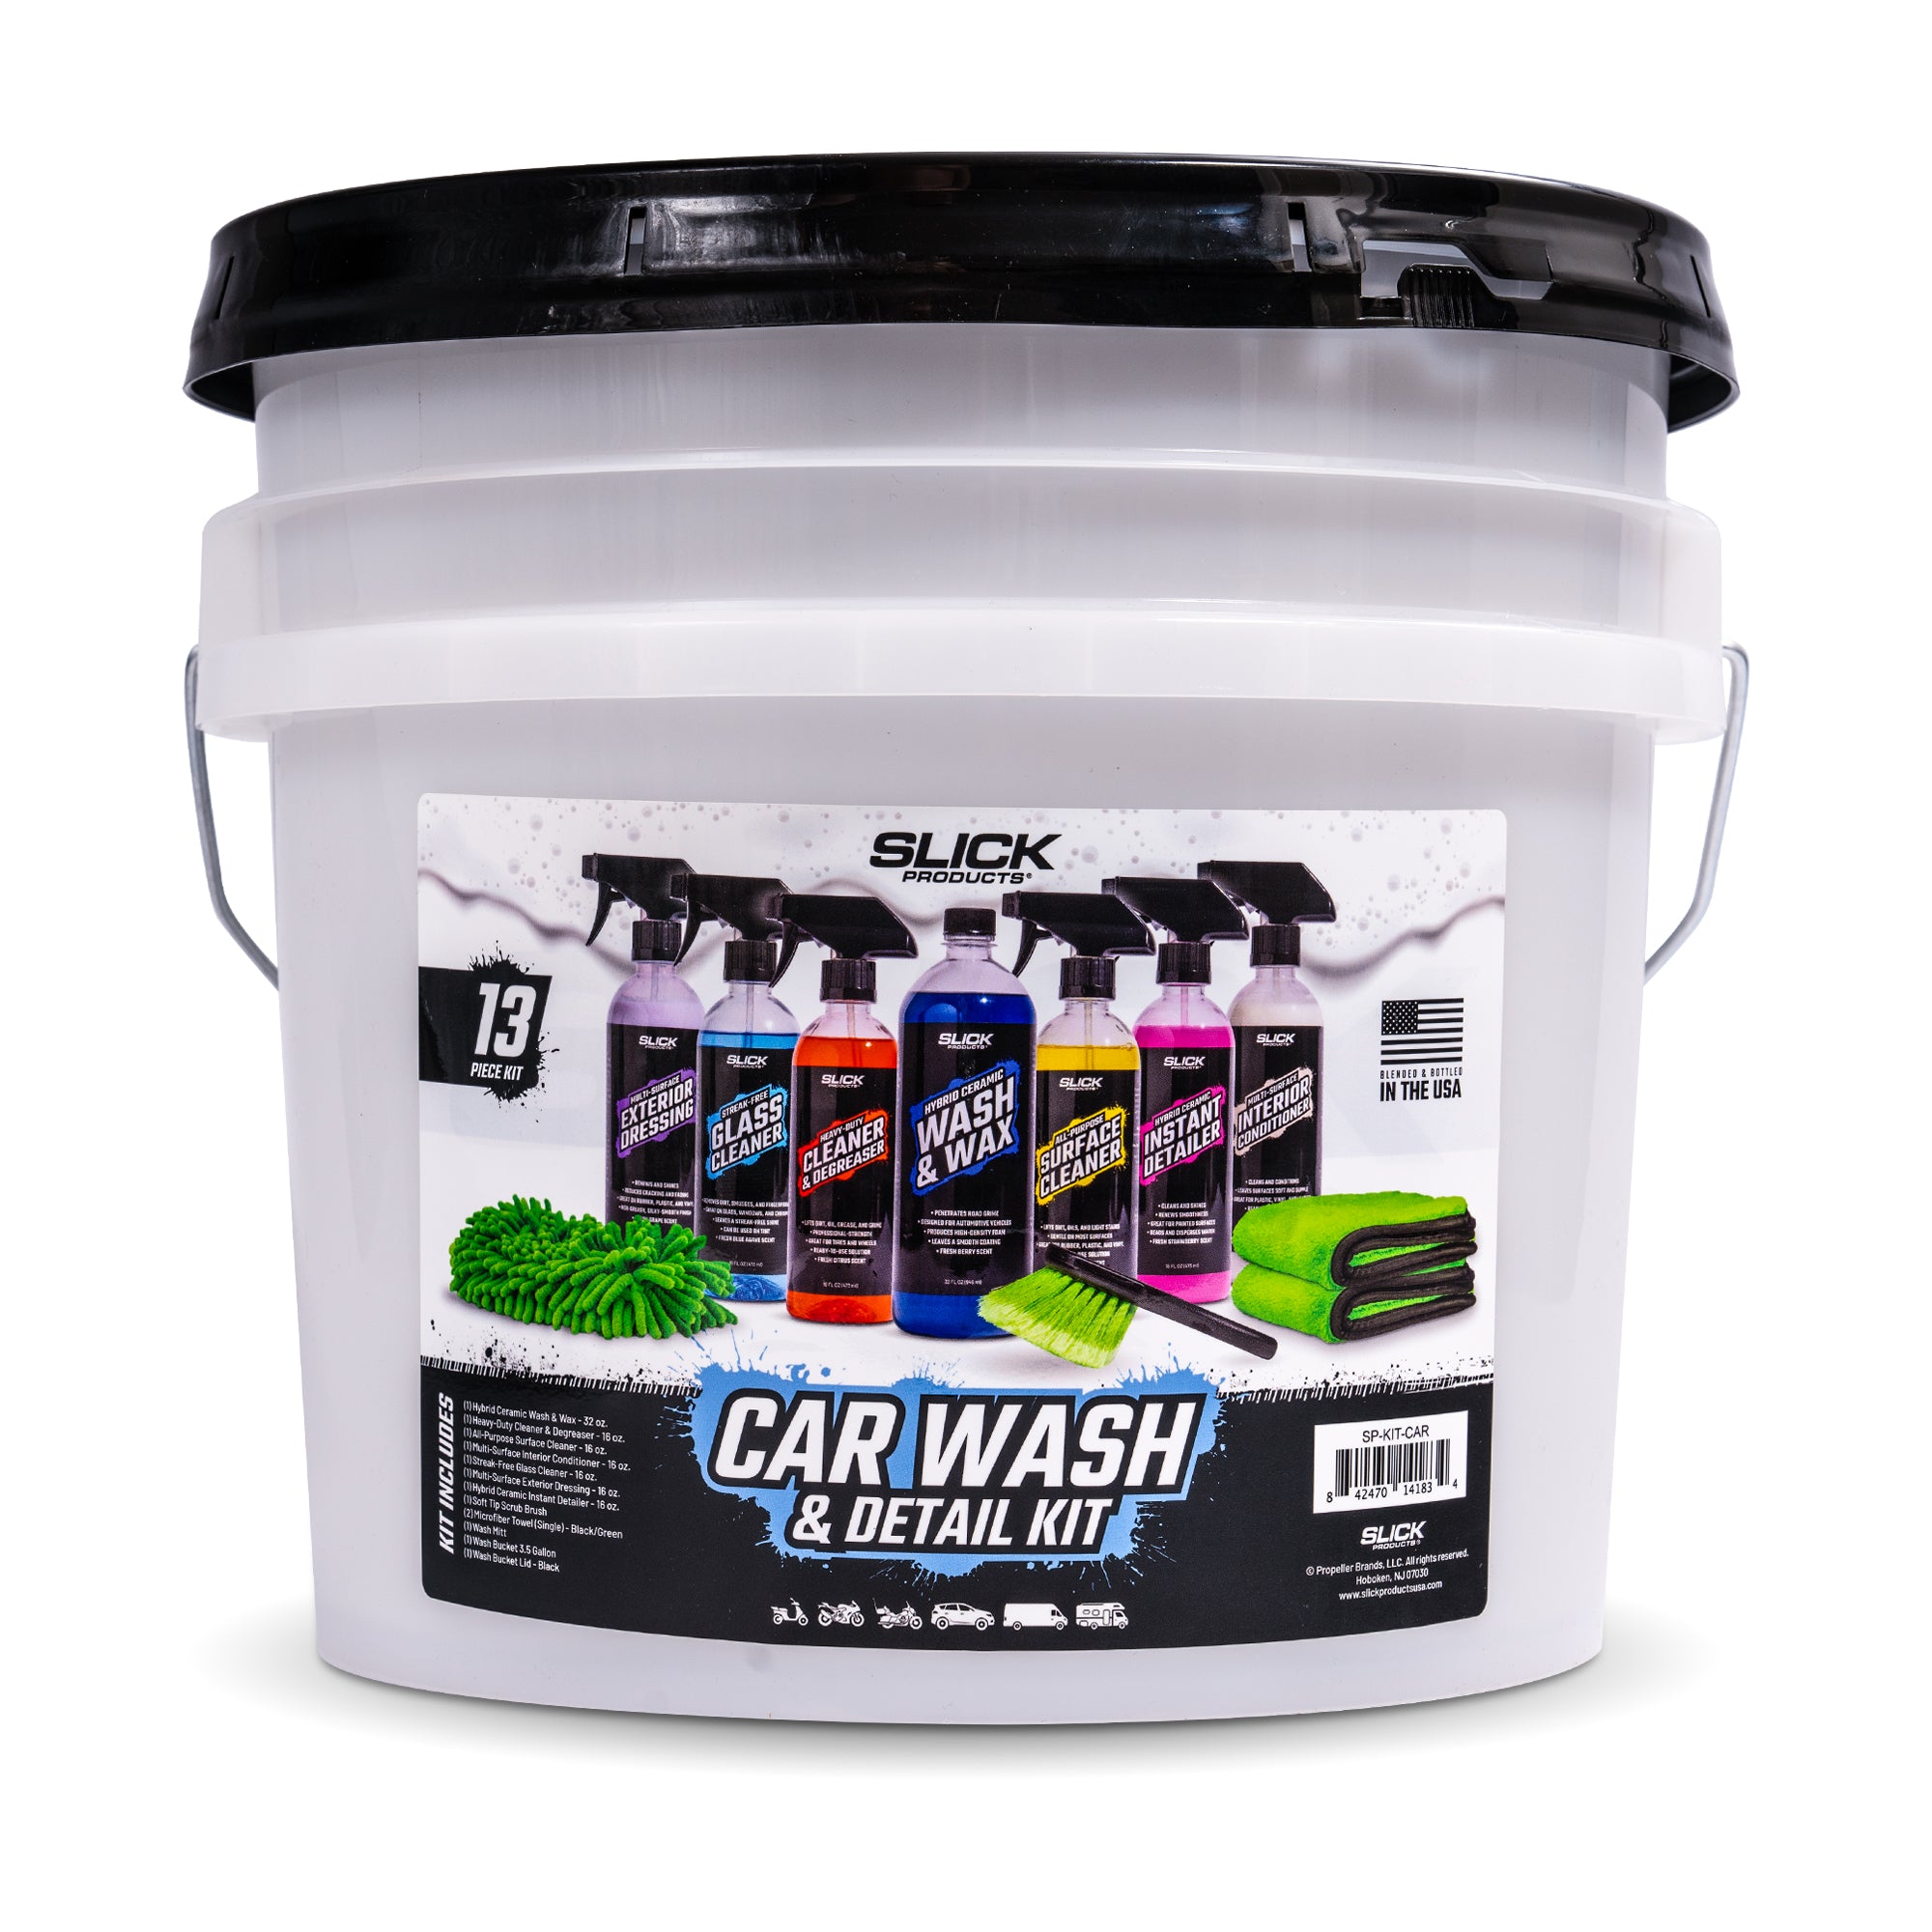 Car Wash Care Kit| Best Car Cleaning Kit|5 Piece Car Wash Supplies  |All-In-One Car Detailing Kit |Car Wash, Wax and Quick Detailer|(5 Items)